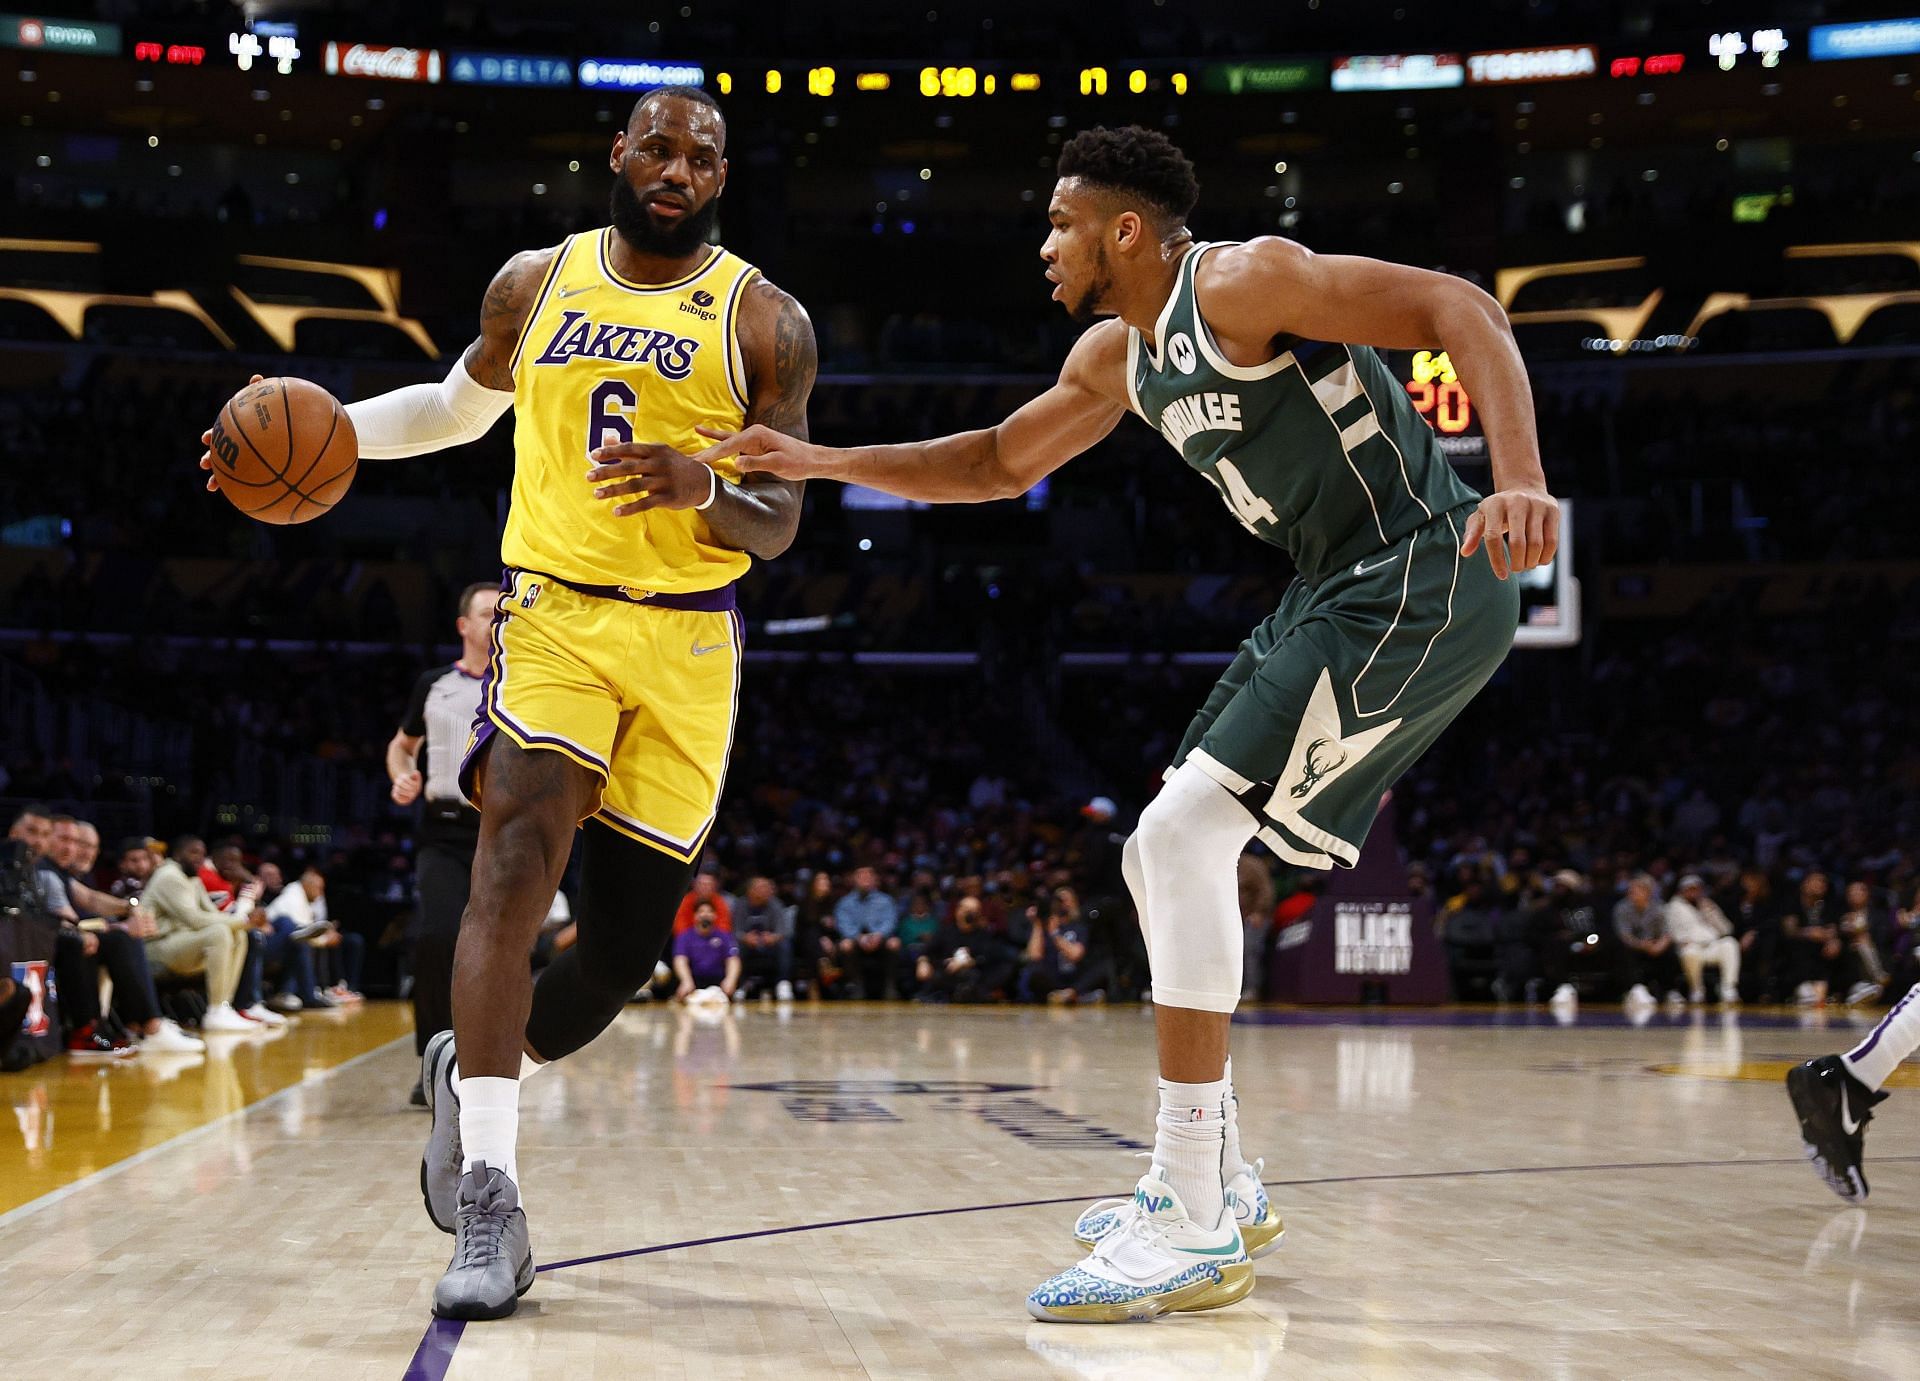 LeBron James #6 of the Los Angeles Lakers and Giannis Antetokounmpo #34 of the Milwaukee Buck